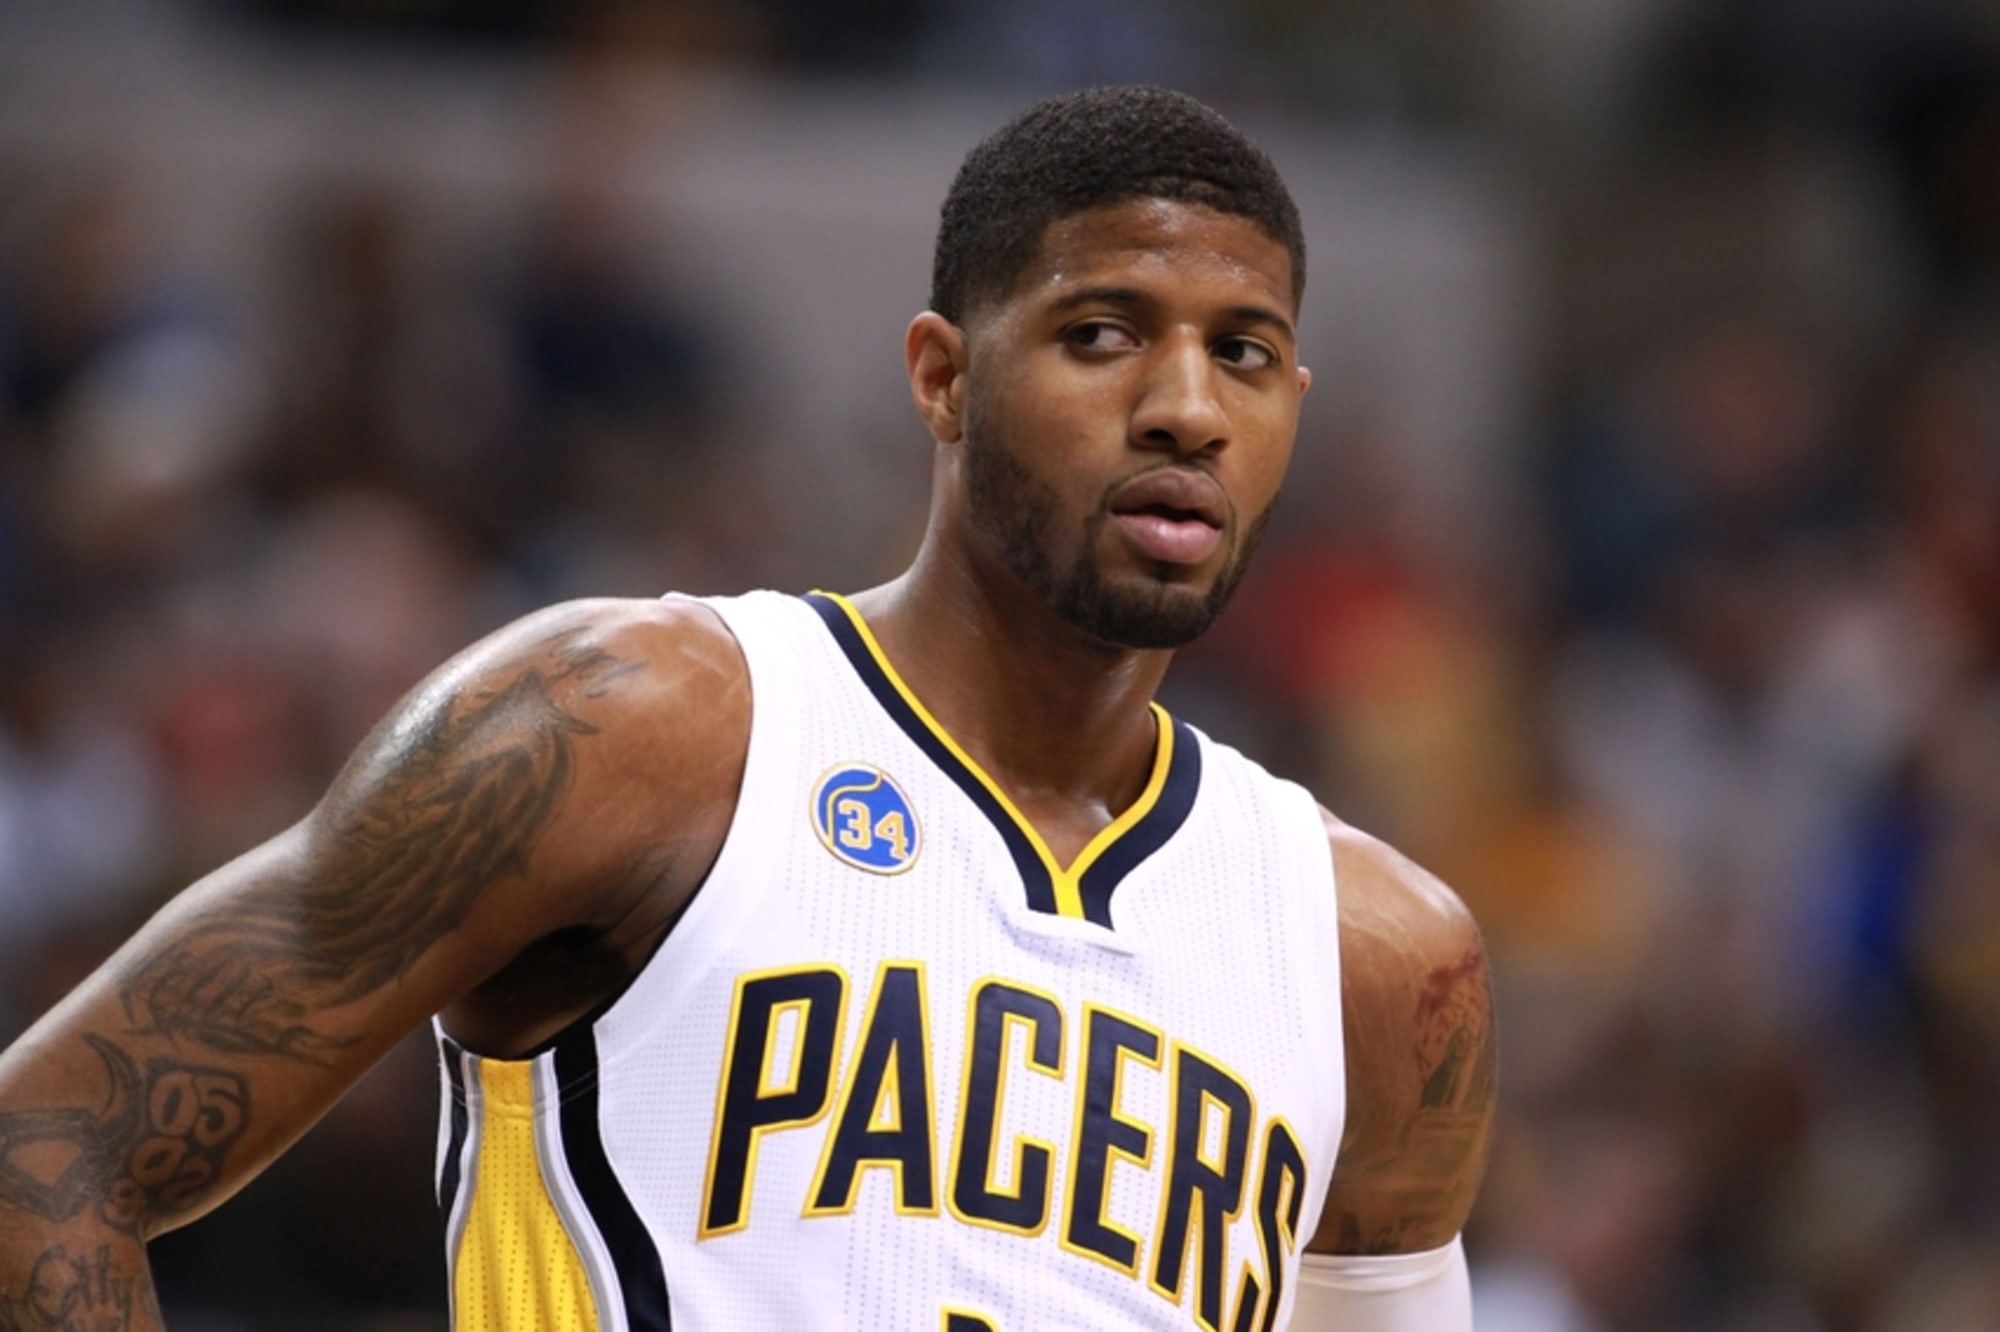 Indiana Pacers 13 Paul George Pacers 2016 Christmas jersey